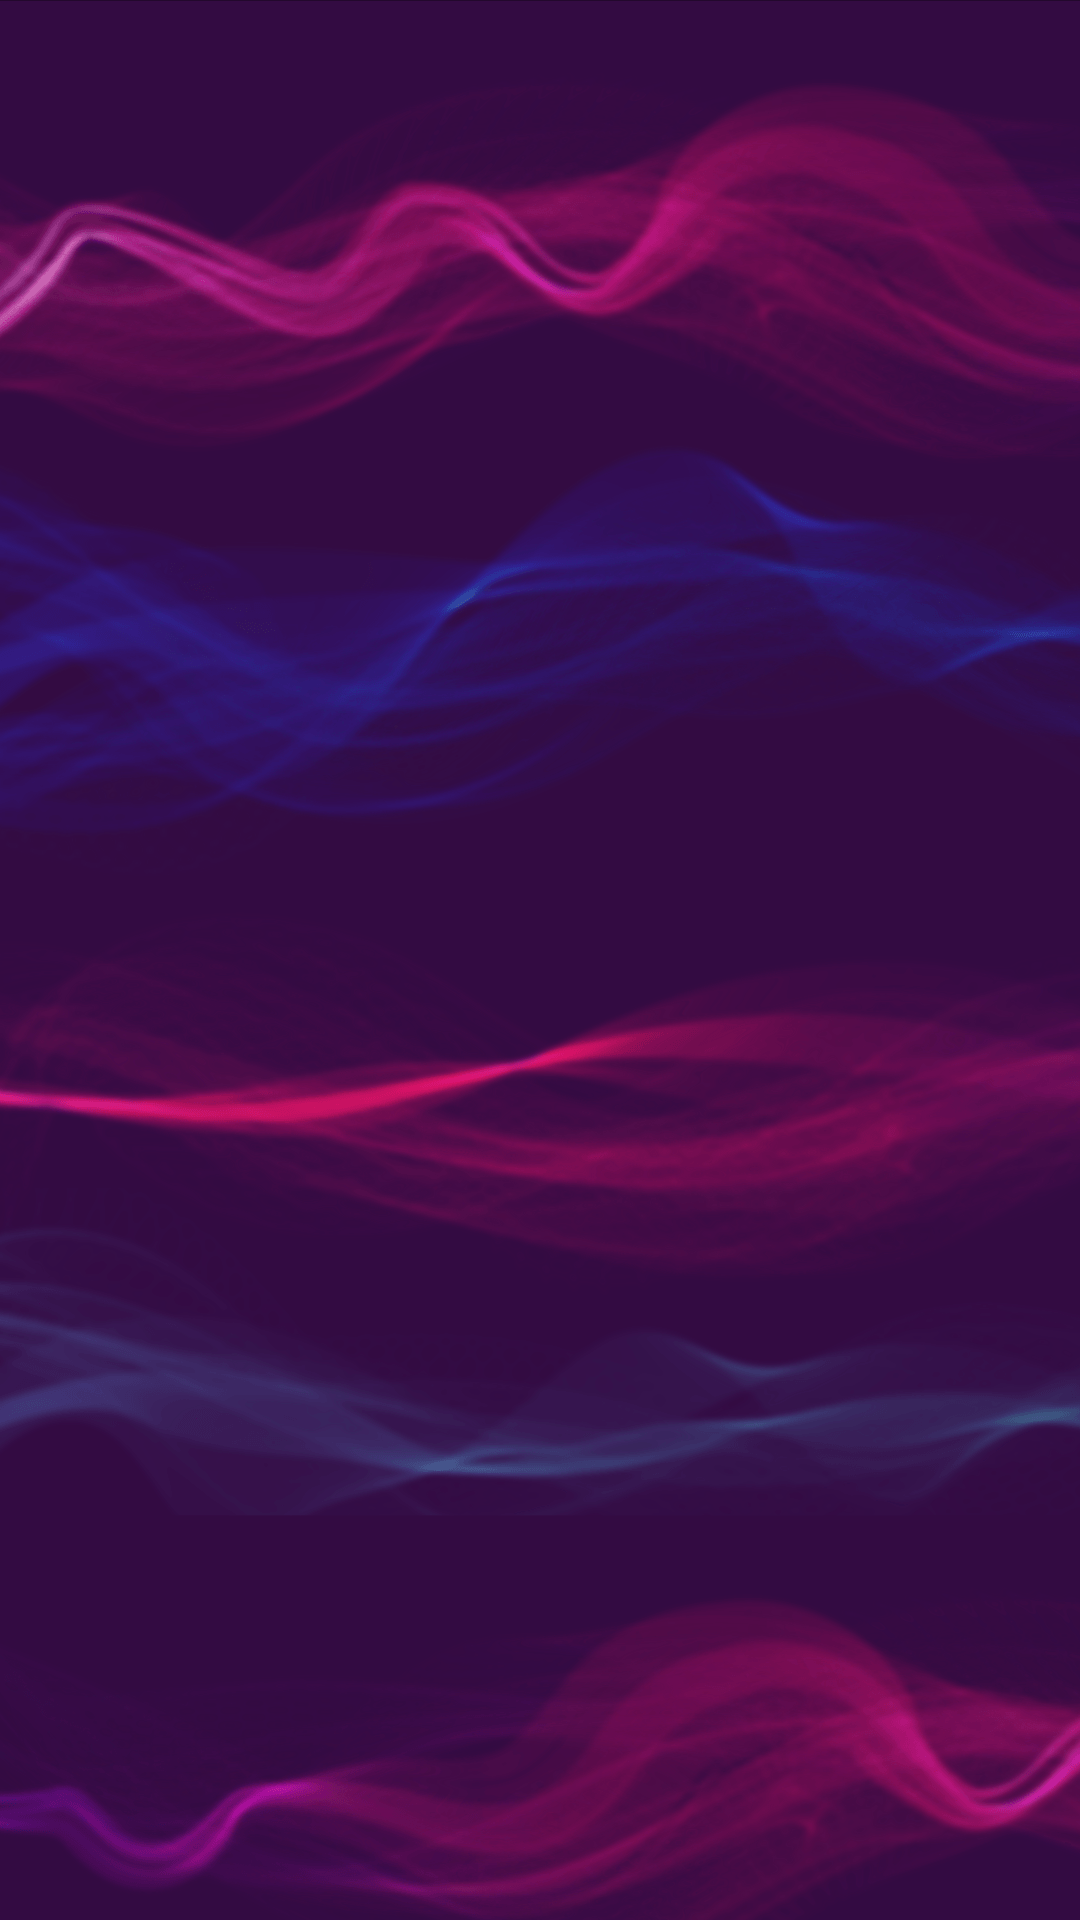 Download Our HD Colorful Smoke Wallpaper For Android Phones .0061